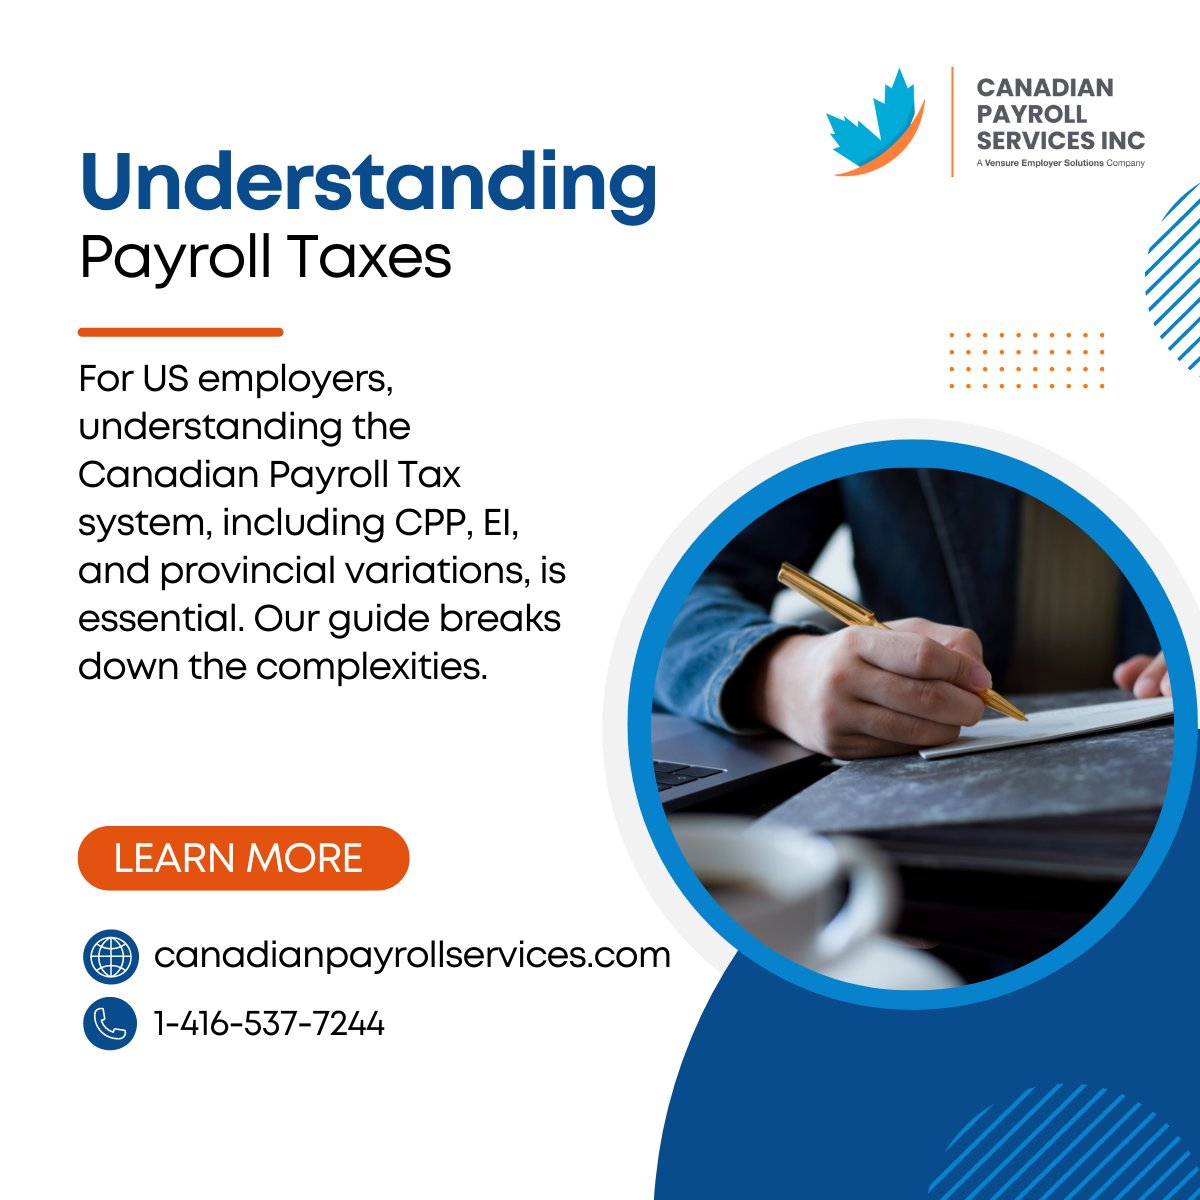 Decoding Canadian Payroll Taxes: A guide for US employers looking to understand the complexities of CPP, EI, and provincial variations. 📚 Get the full breakdown 👉 canadianpayrollservices.com/provincial-pay… #PayrollTaxes #CanadianBusiness #USExpansion